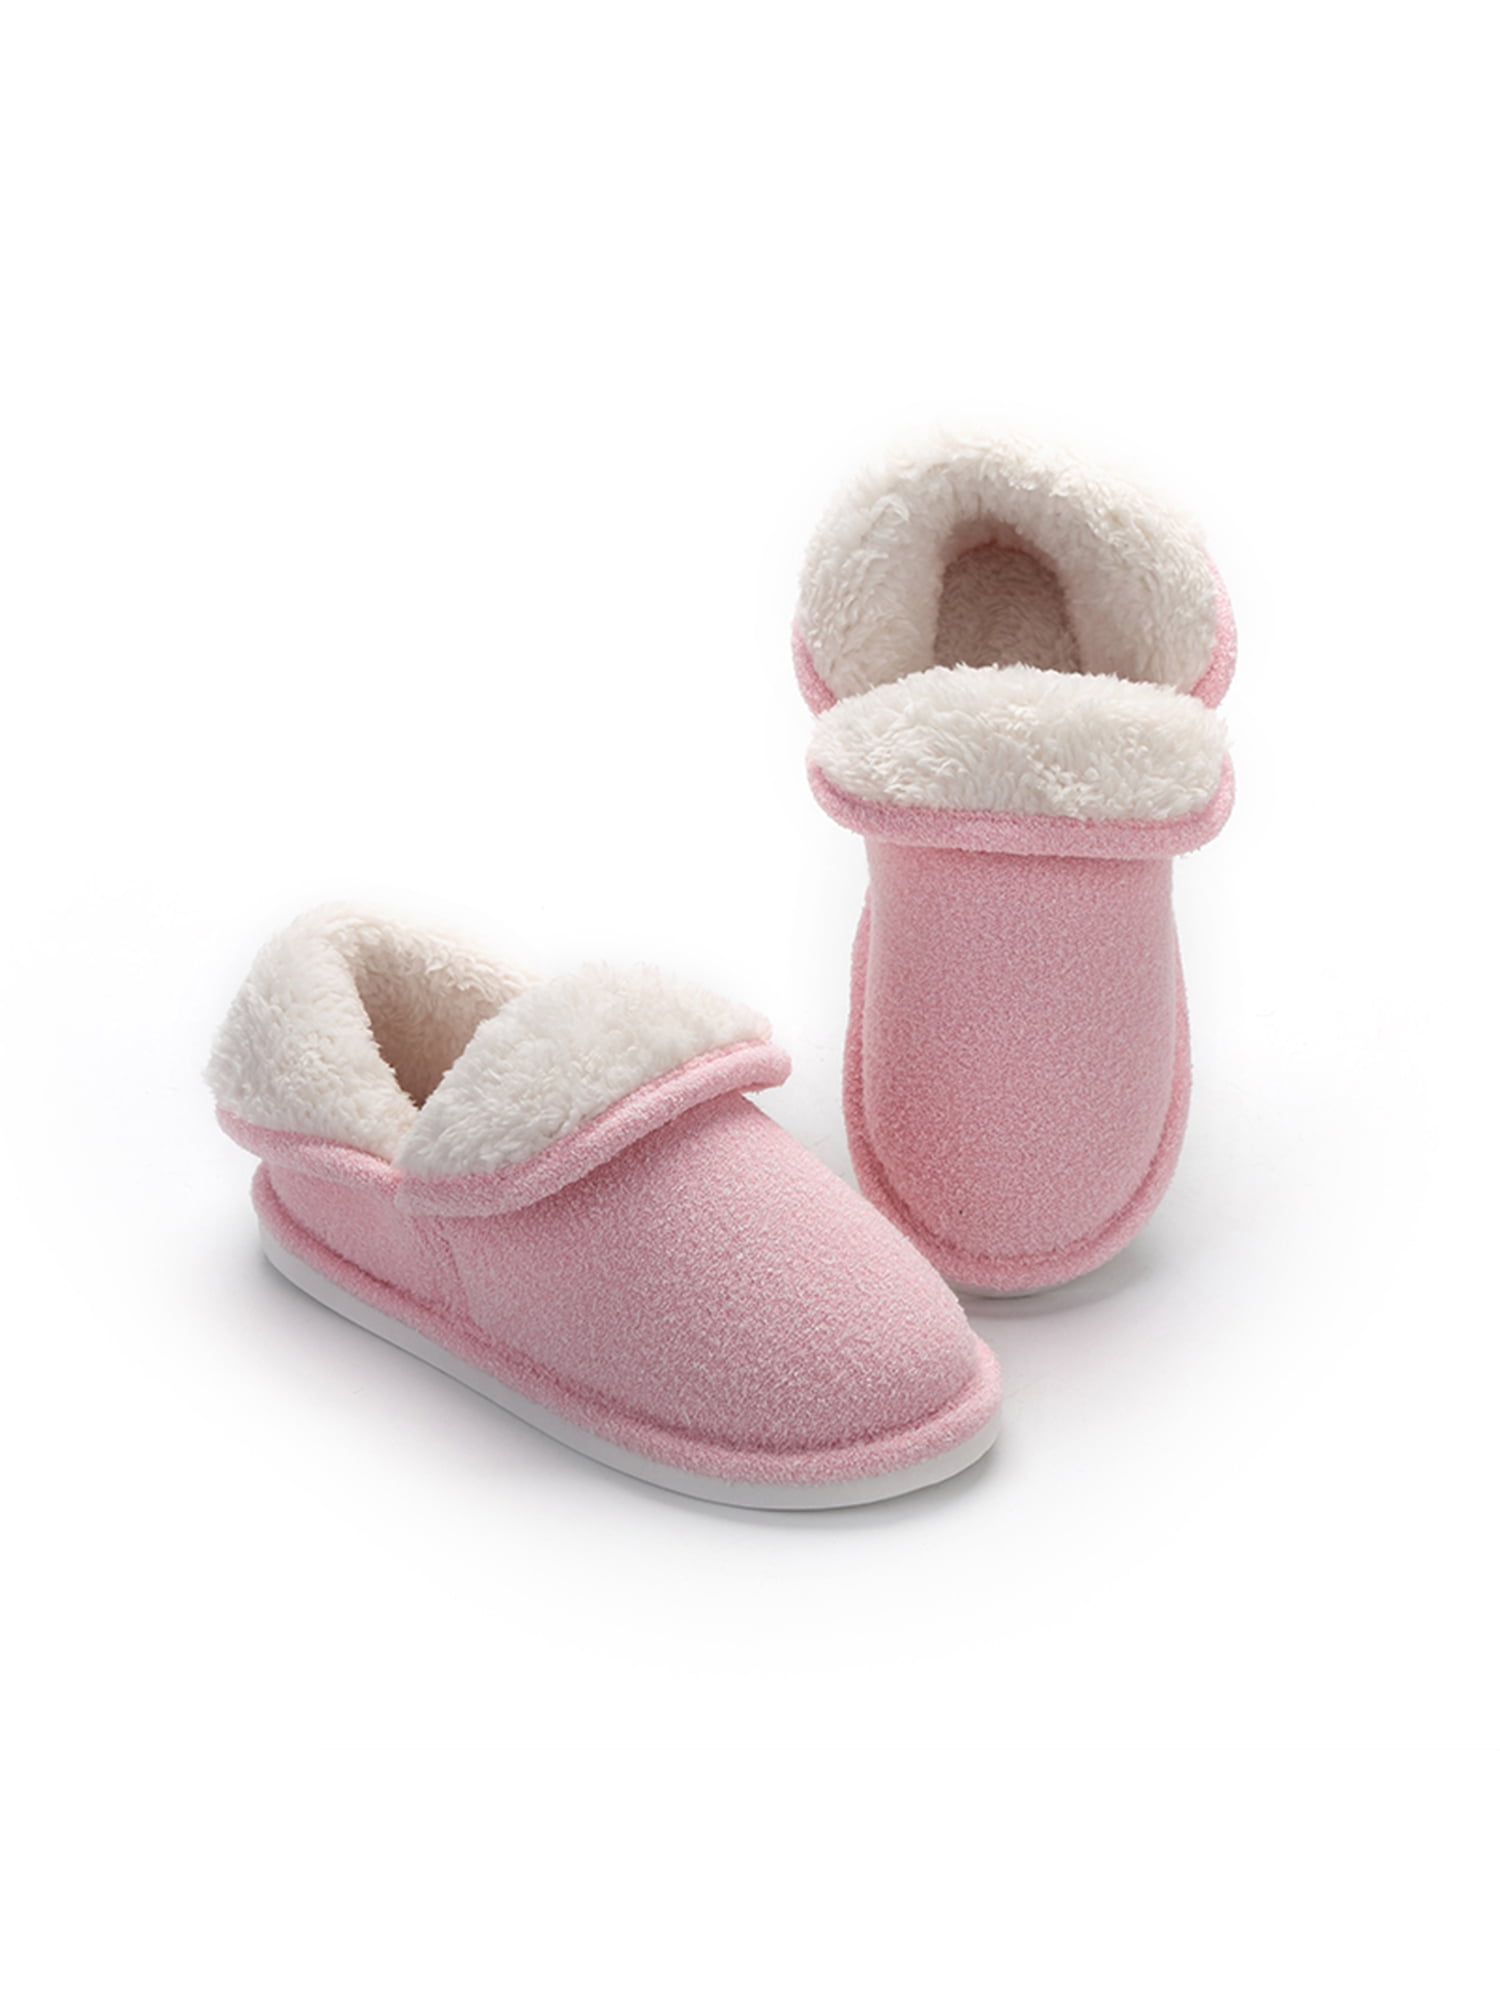 Ladies Womens Memory Foam Slippers House Shoes Anti Slip Sole with Bow Pink Soft